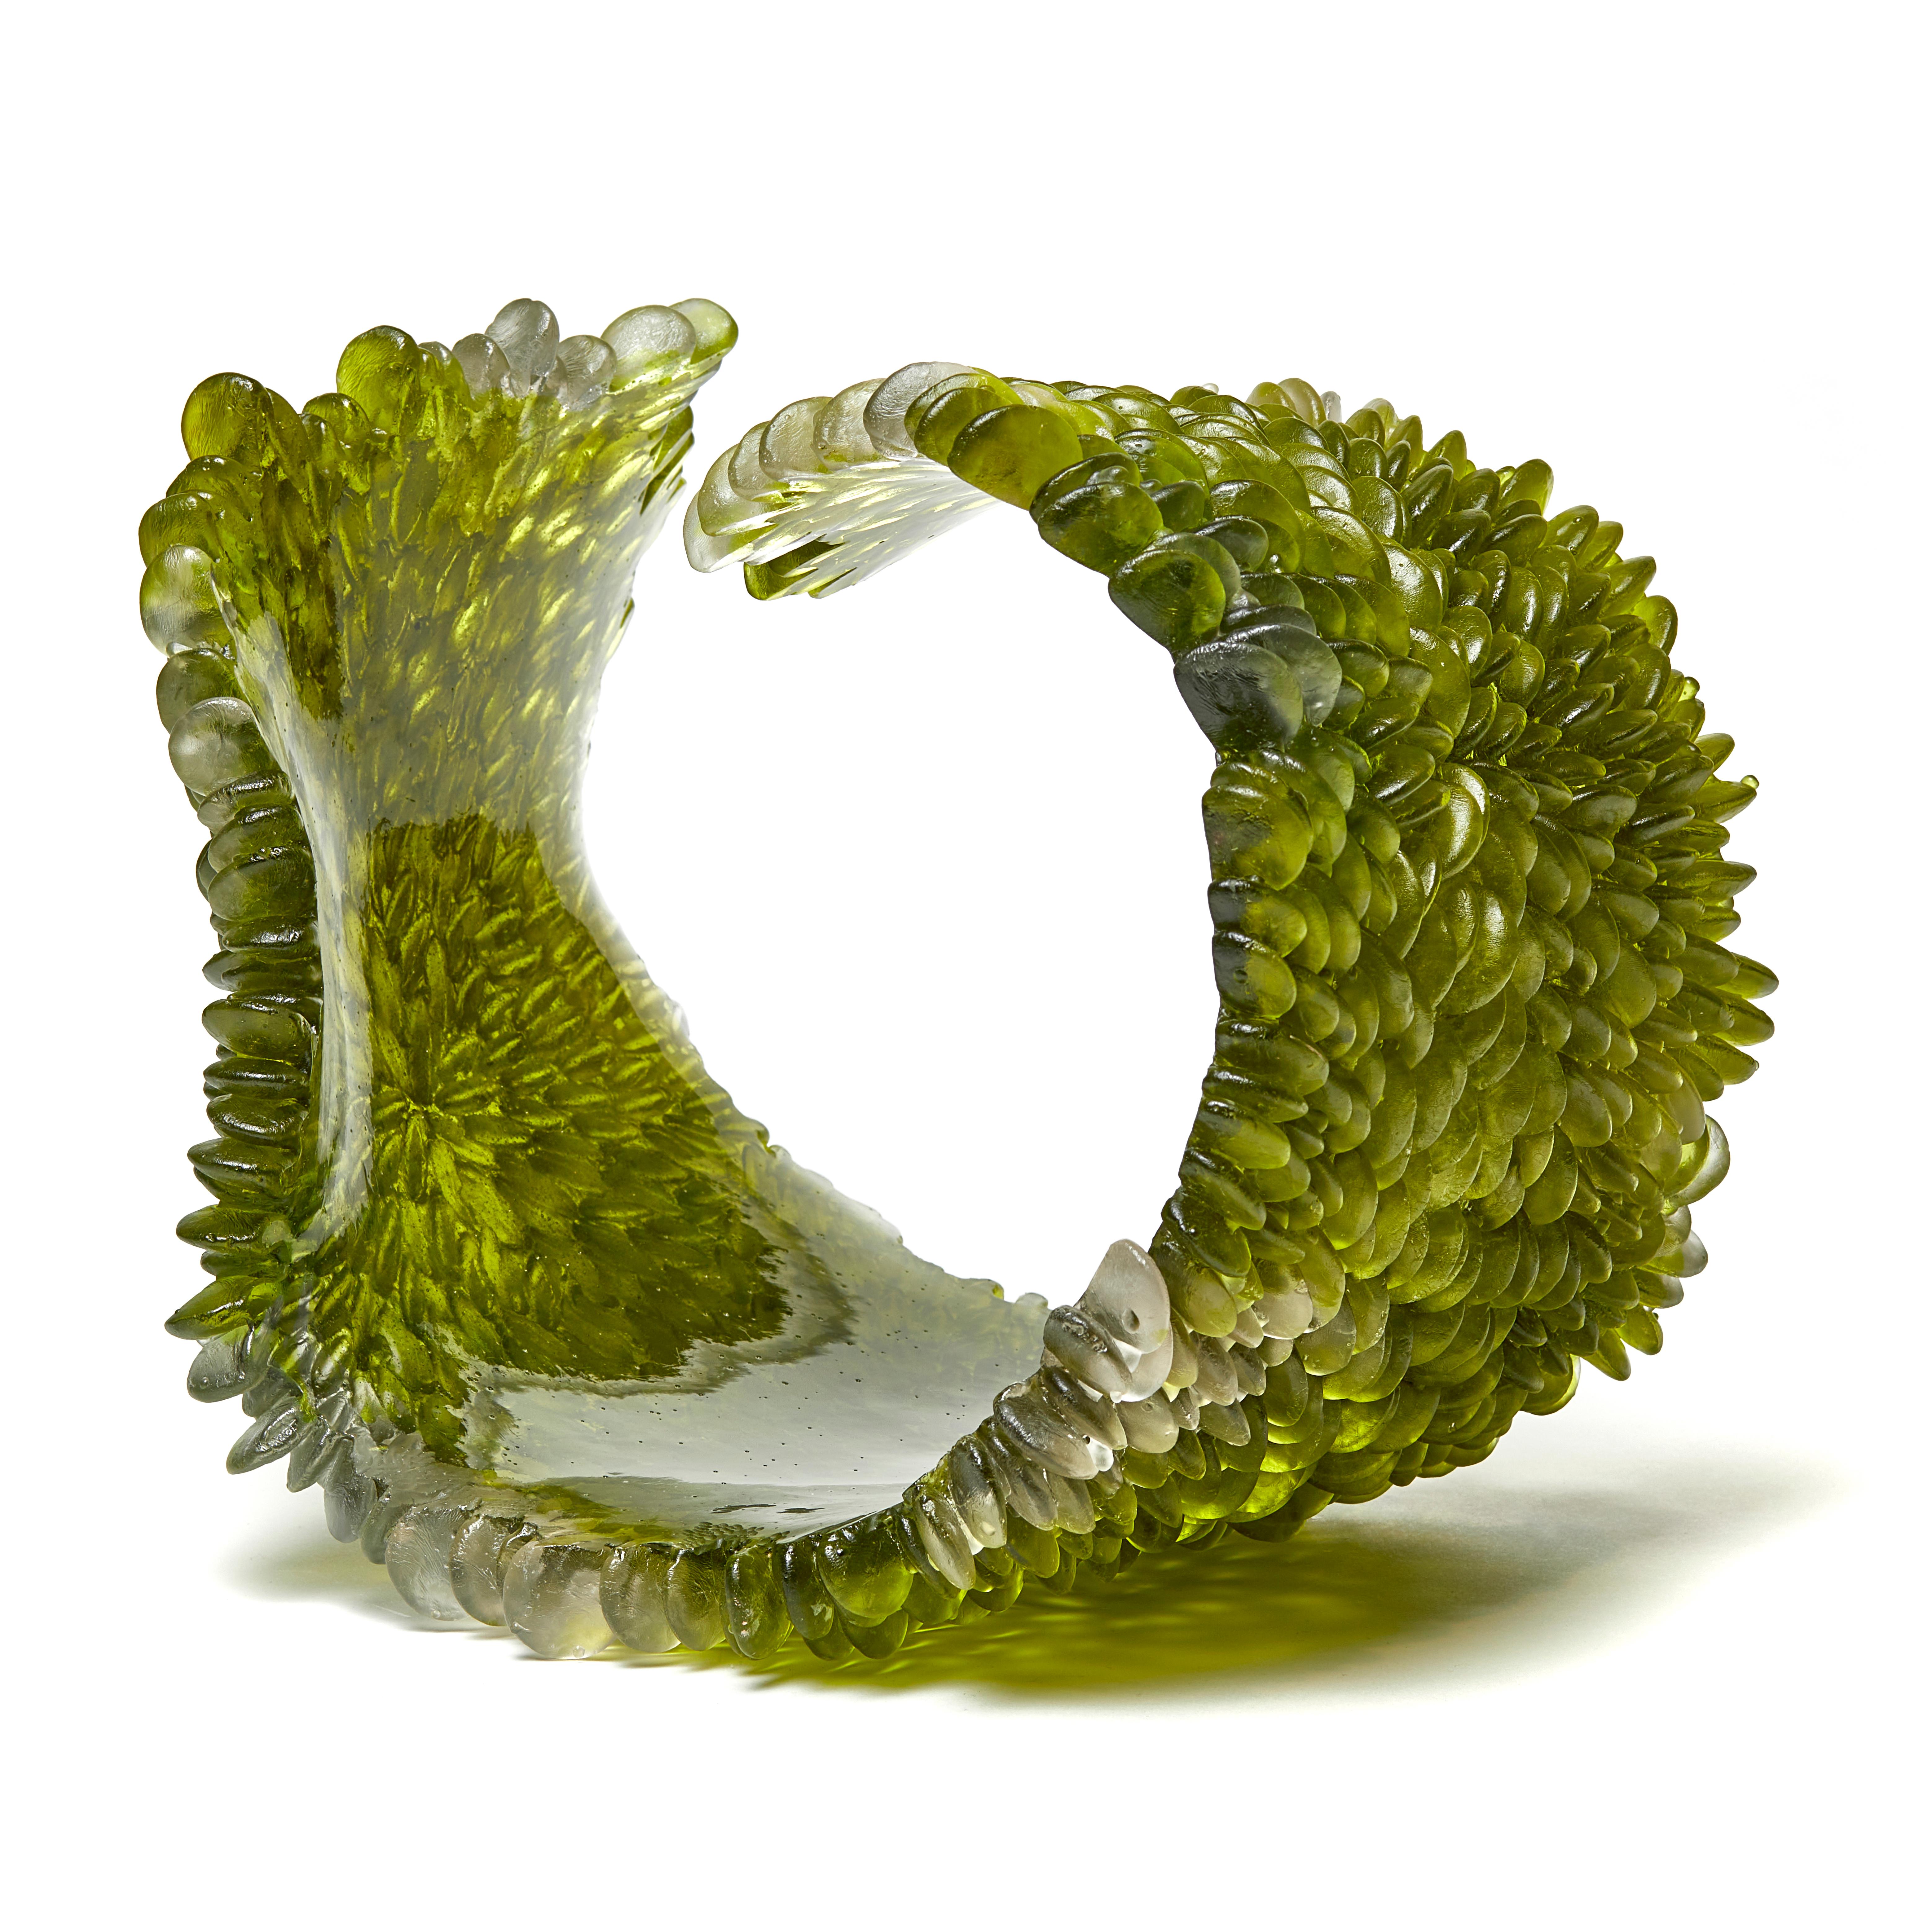 Organic Modern  Spring Greens, Unique Glass Sculpture in Olive Green by Nina Casson McGarva